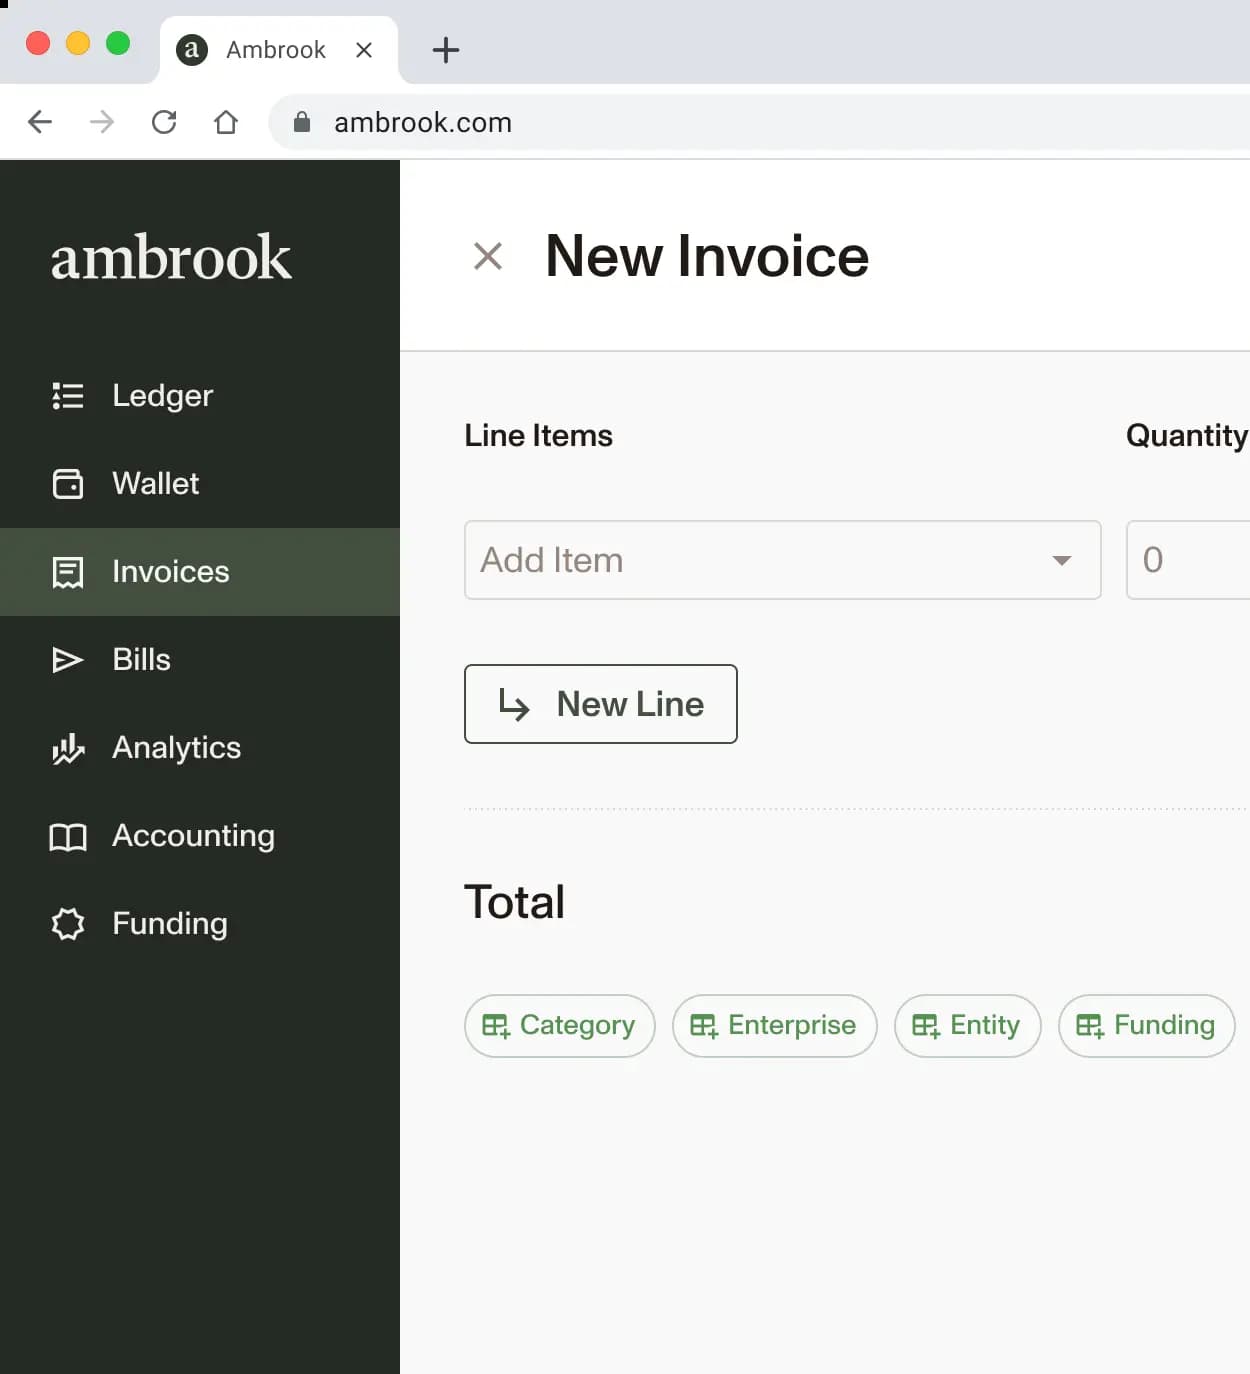 Ambrook's web application showing invoicing, bills, Wallet, and accounting.